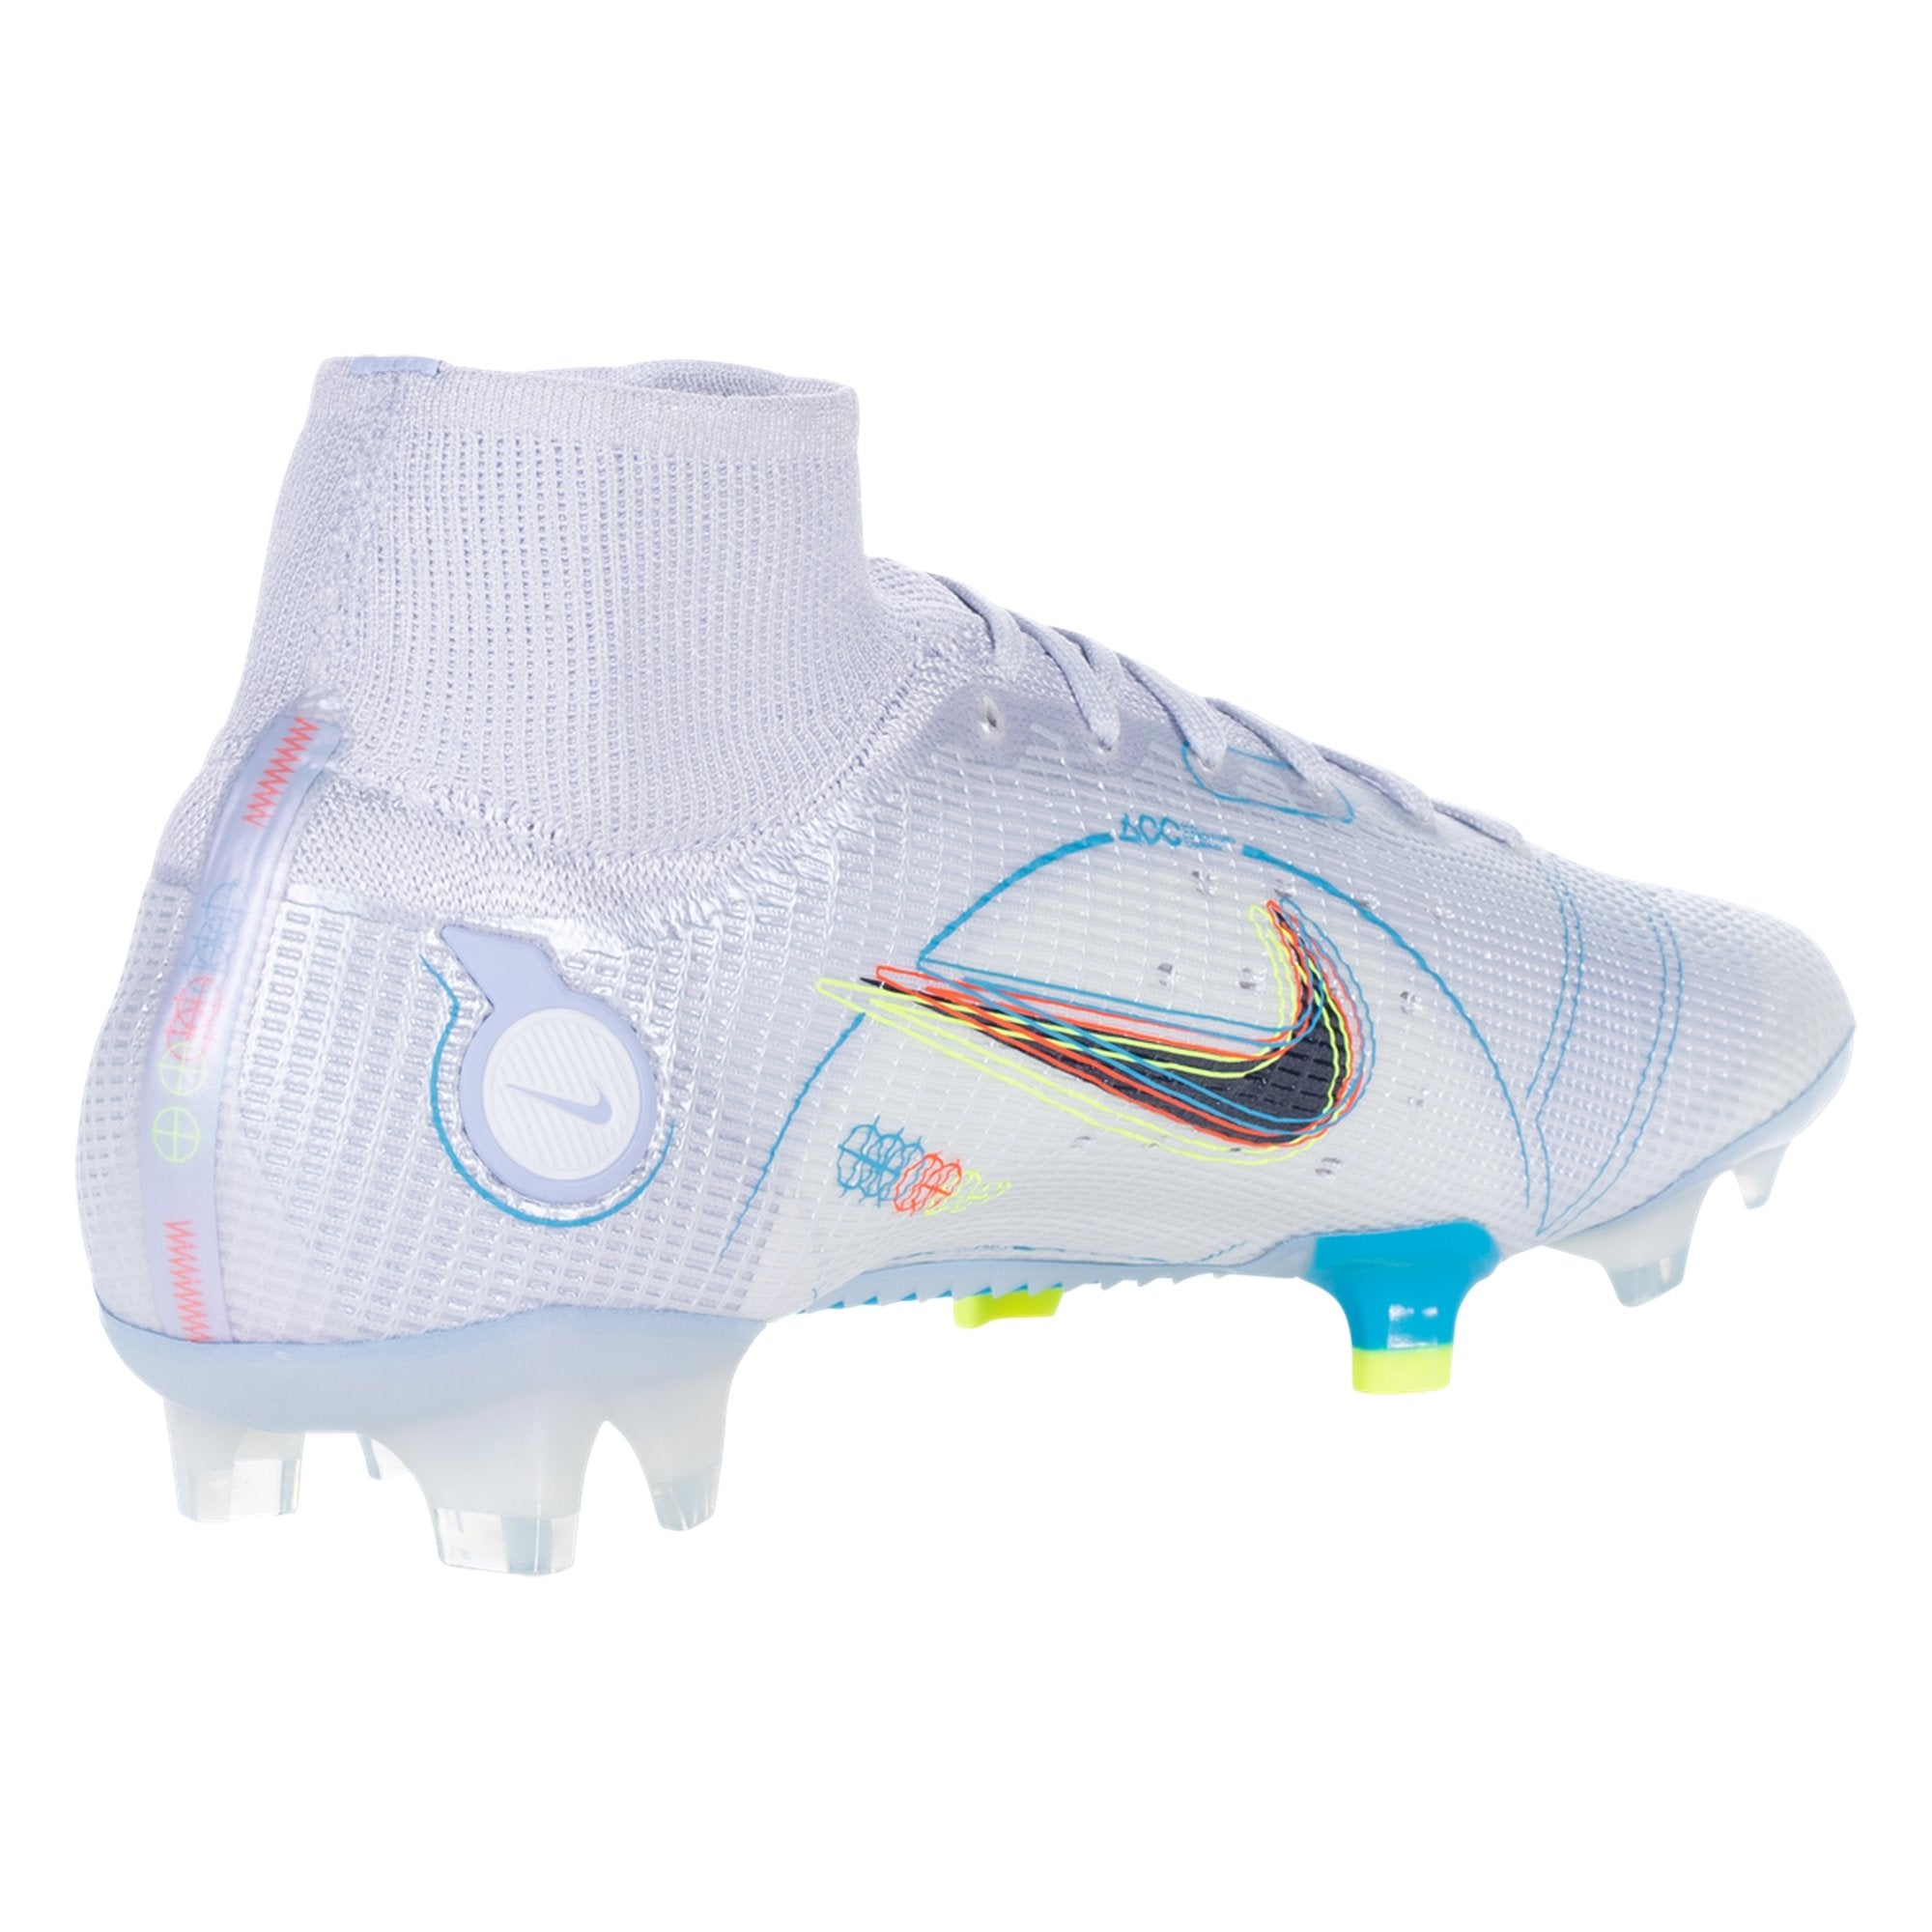 Nike Mercurial Superfly 8 Elite FG Firm Ground Soccer Cleat - Grey